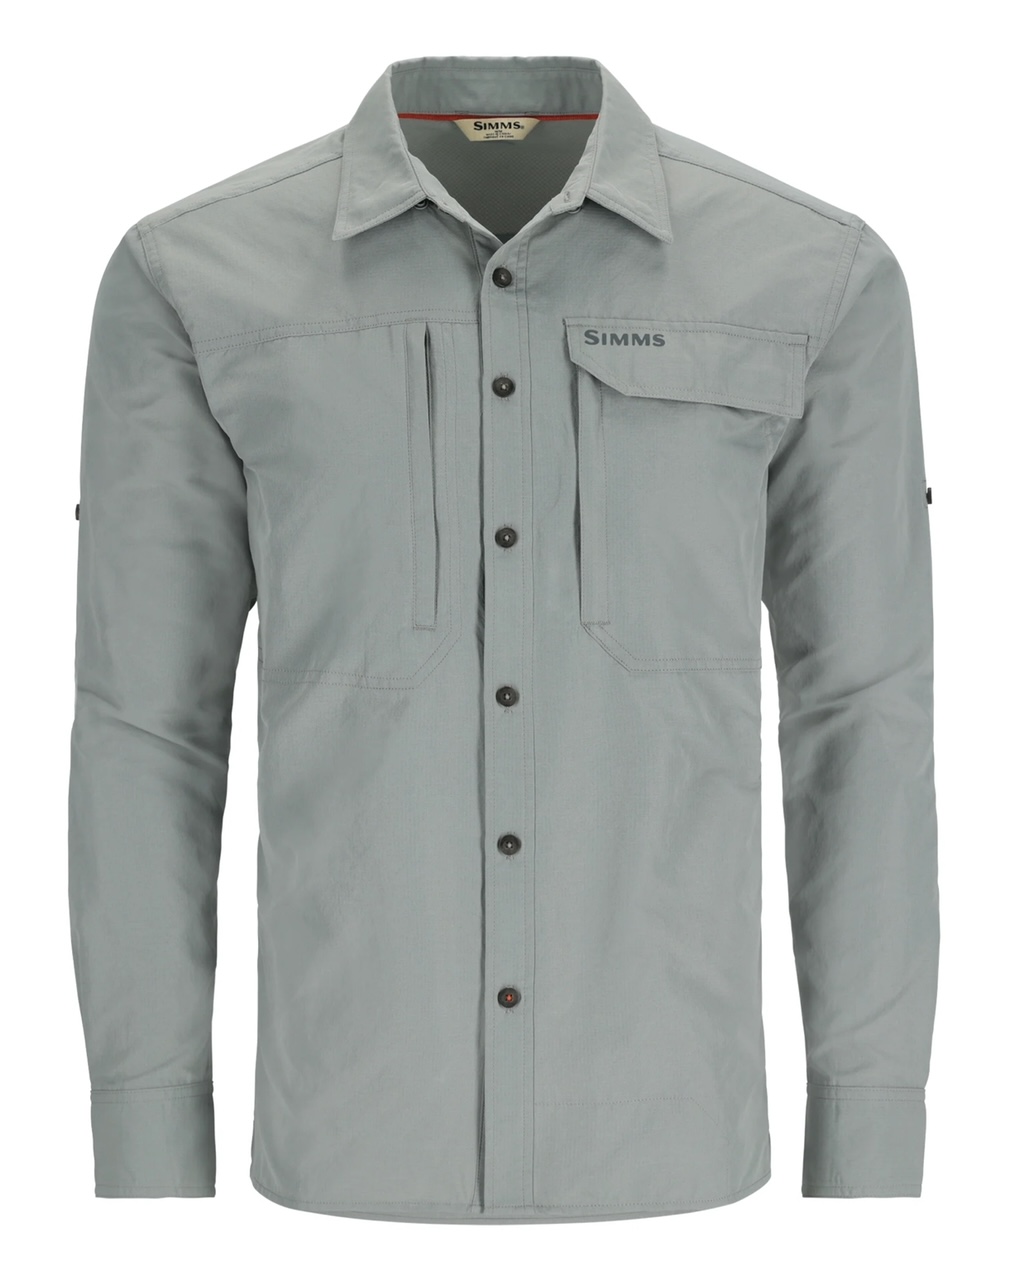 Simms M's Guide Shirt - Cinder - Small